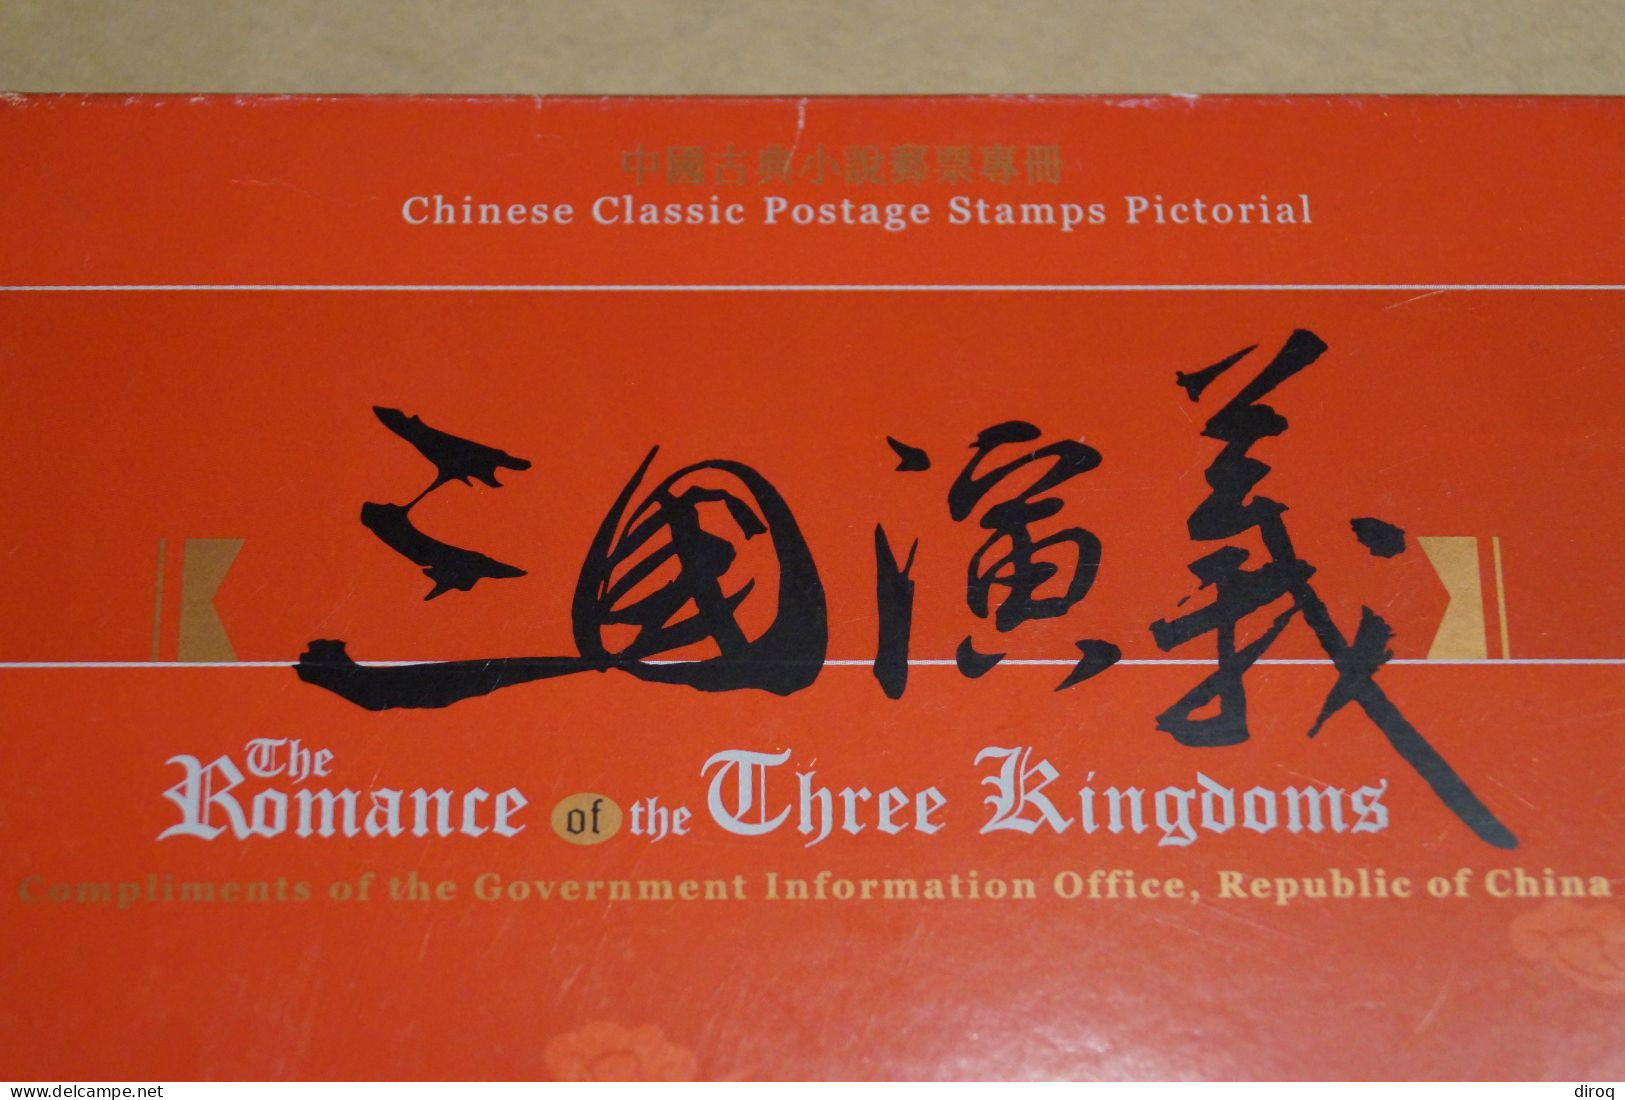 RARE Chine,Chines,The Romance originale état mint,Complet timbres NEUF,collector